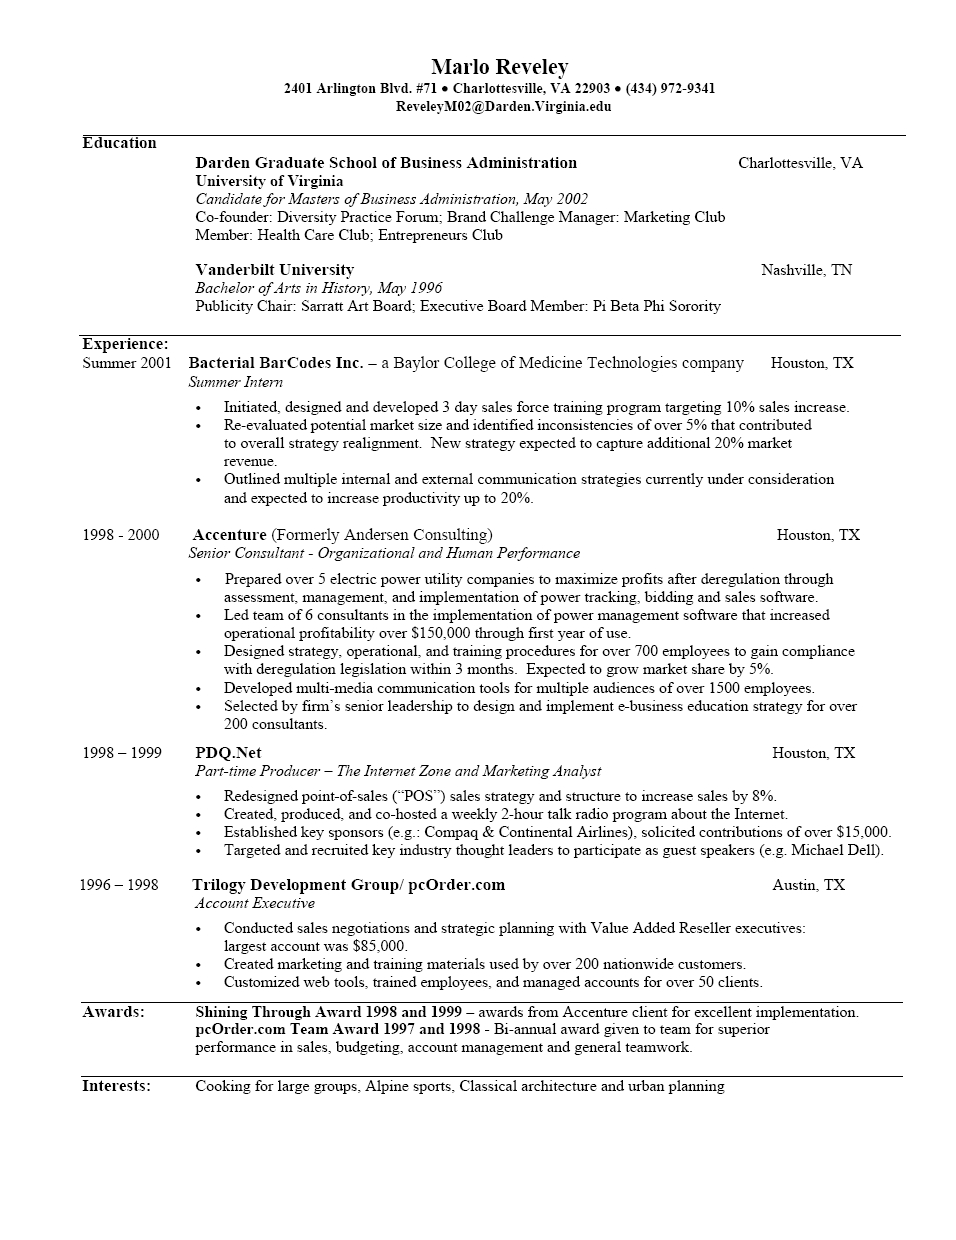 Resume Examples Over 50 Basic Resume Downloadable Resume intended for proportions 956 X 1240